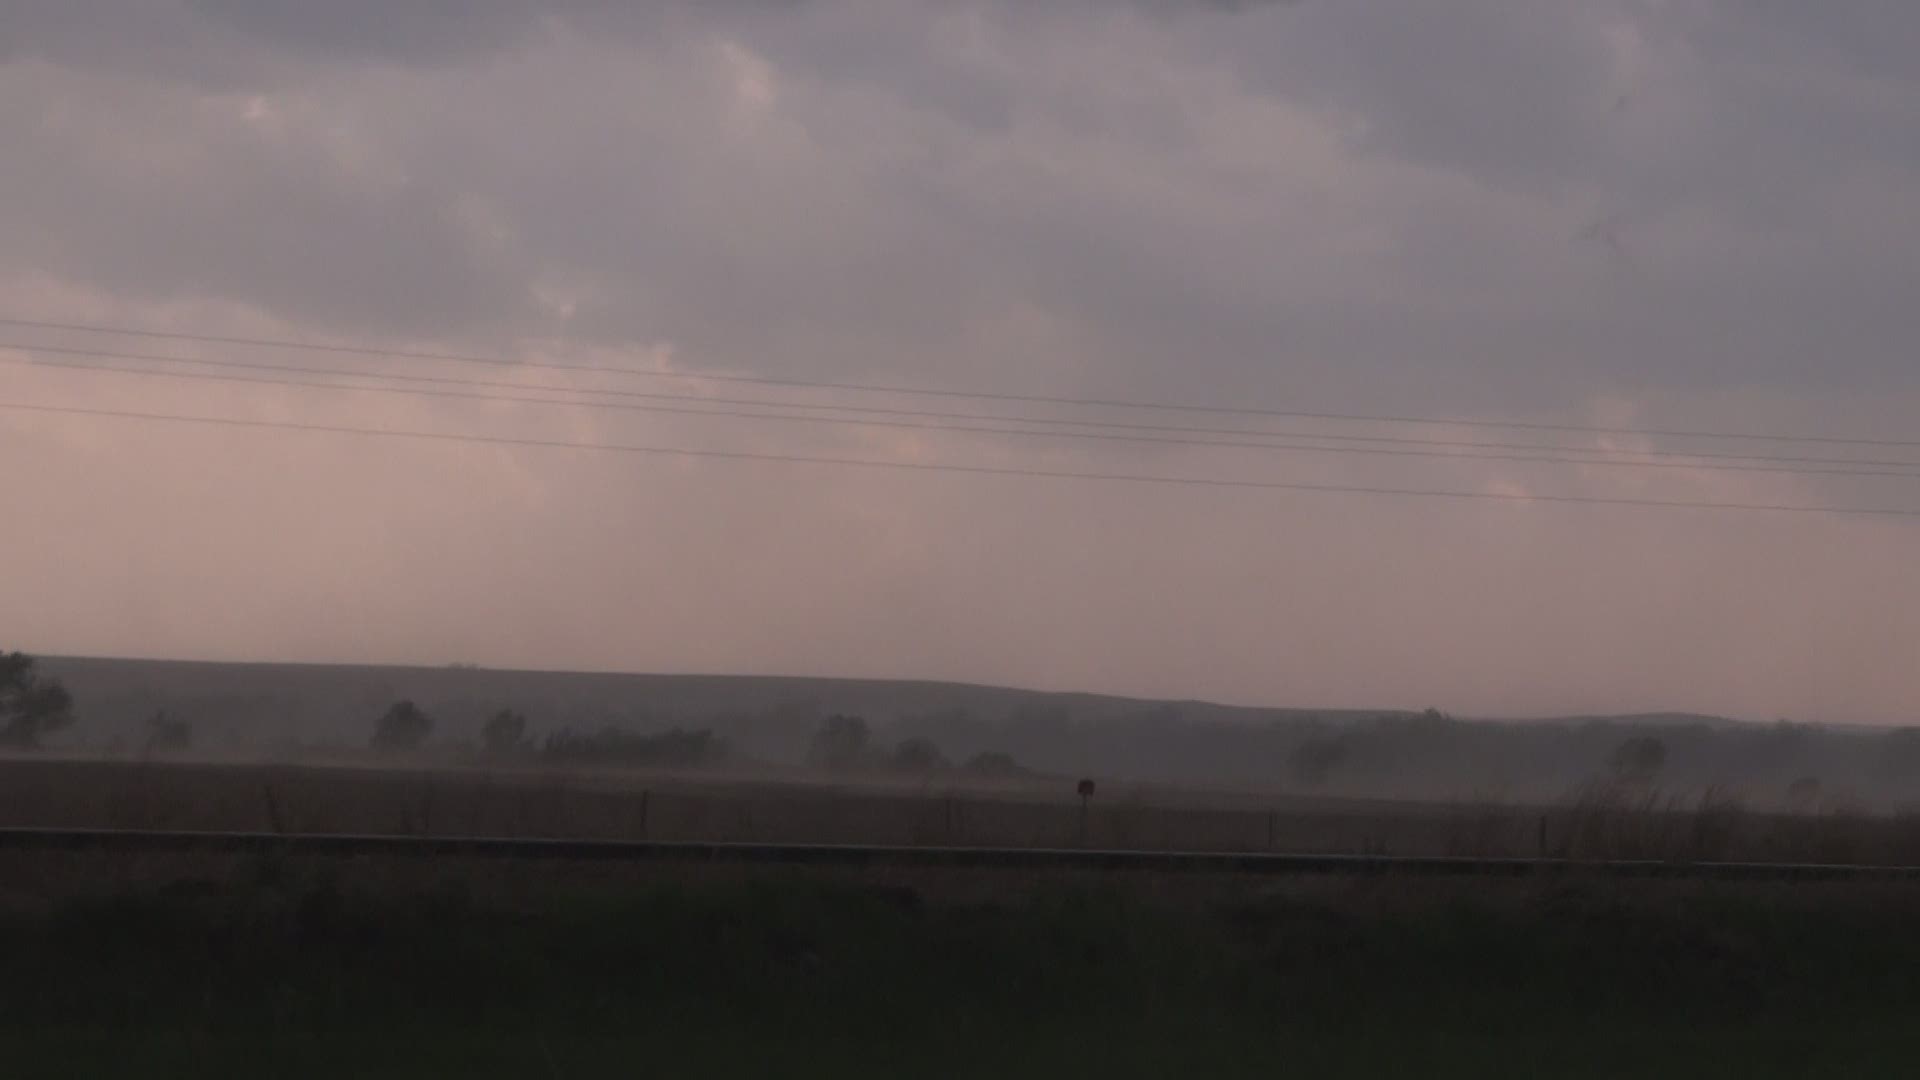 A storm chaser was in McCook, Nebraska when a twister developed around him. Video shows 50 to 60 mile per hour winds spraying dirt and sticks across his truck.